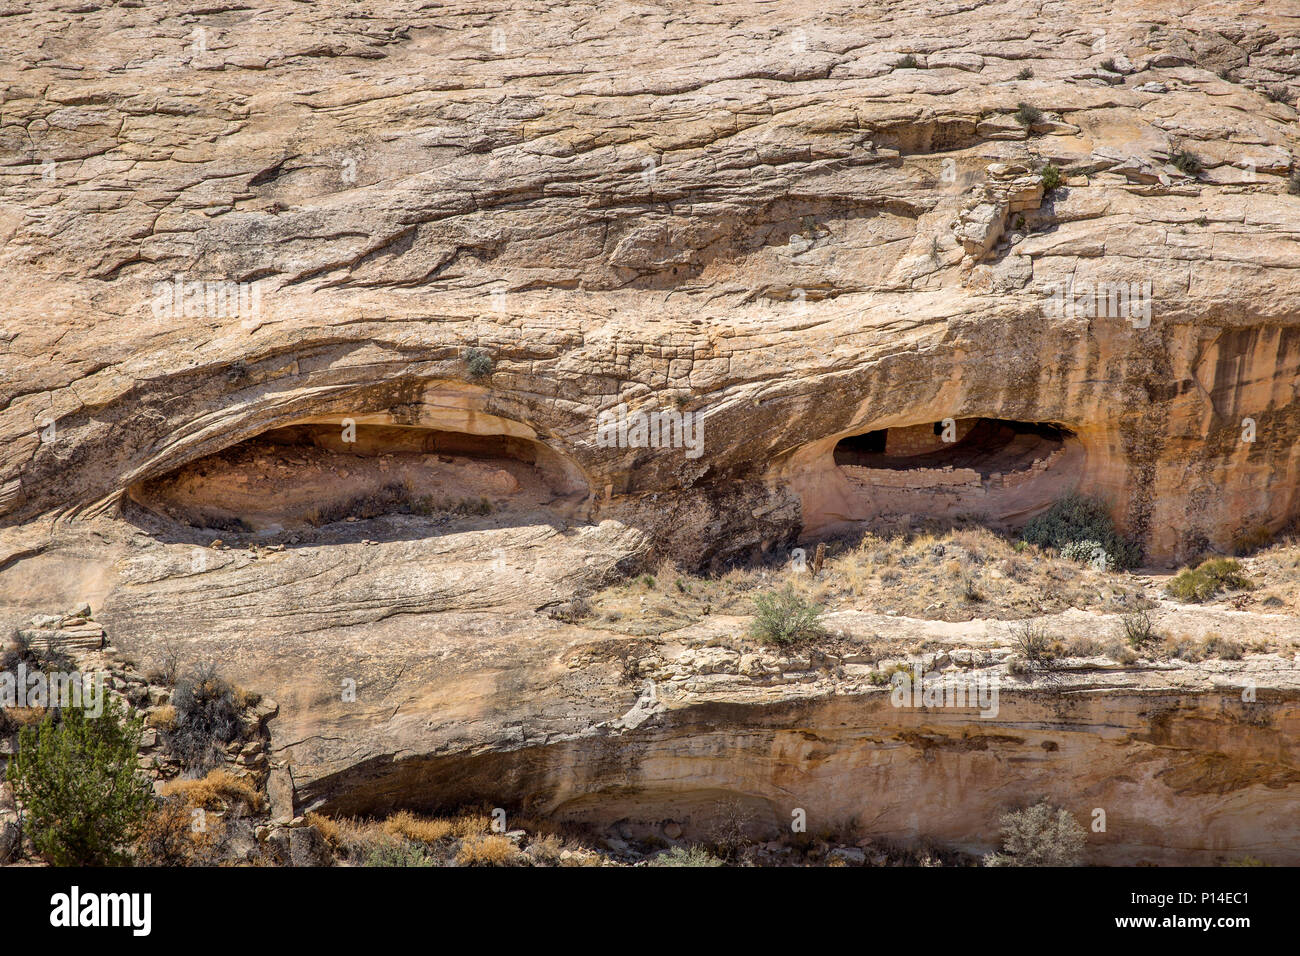 Close-up view of the Ancestral Puebloan cliff dwellings along the Butler Wash of Bears Ears National Monument in Southeastern, Utah Stock Photo